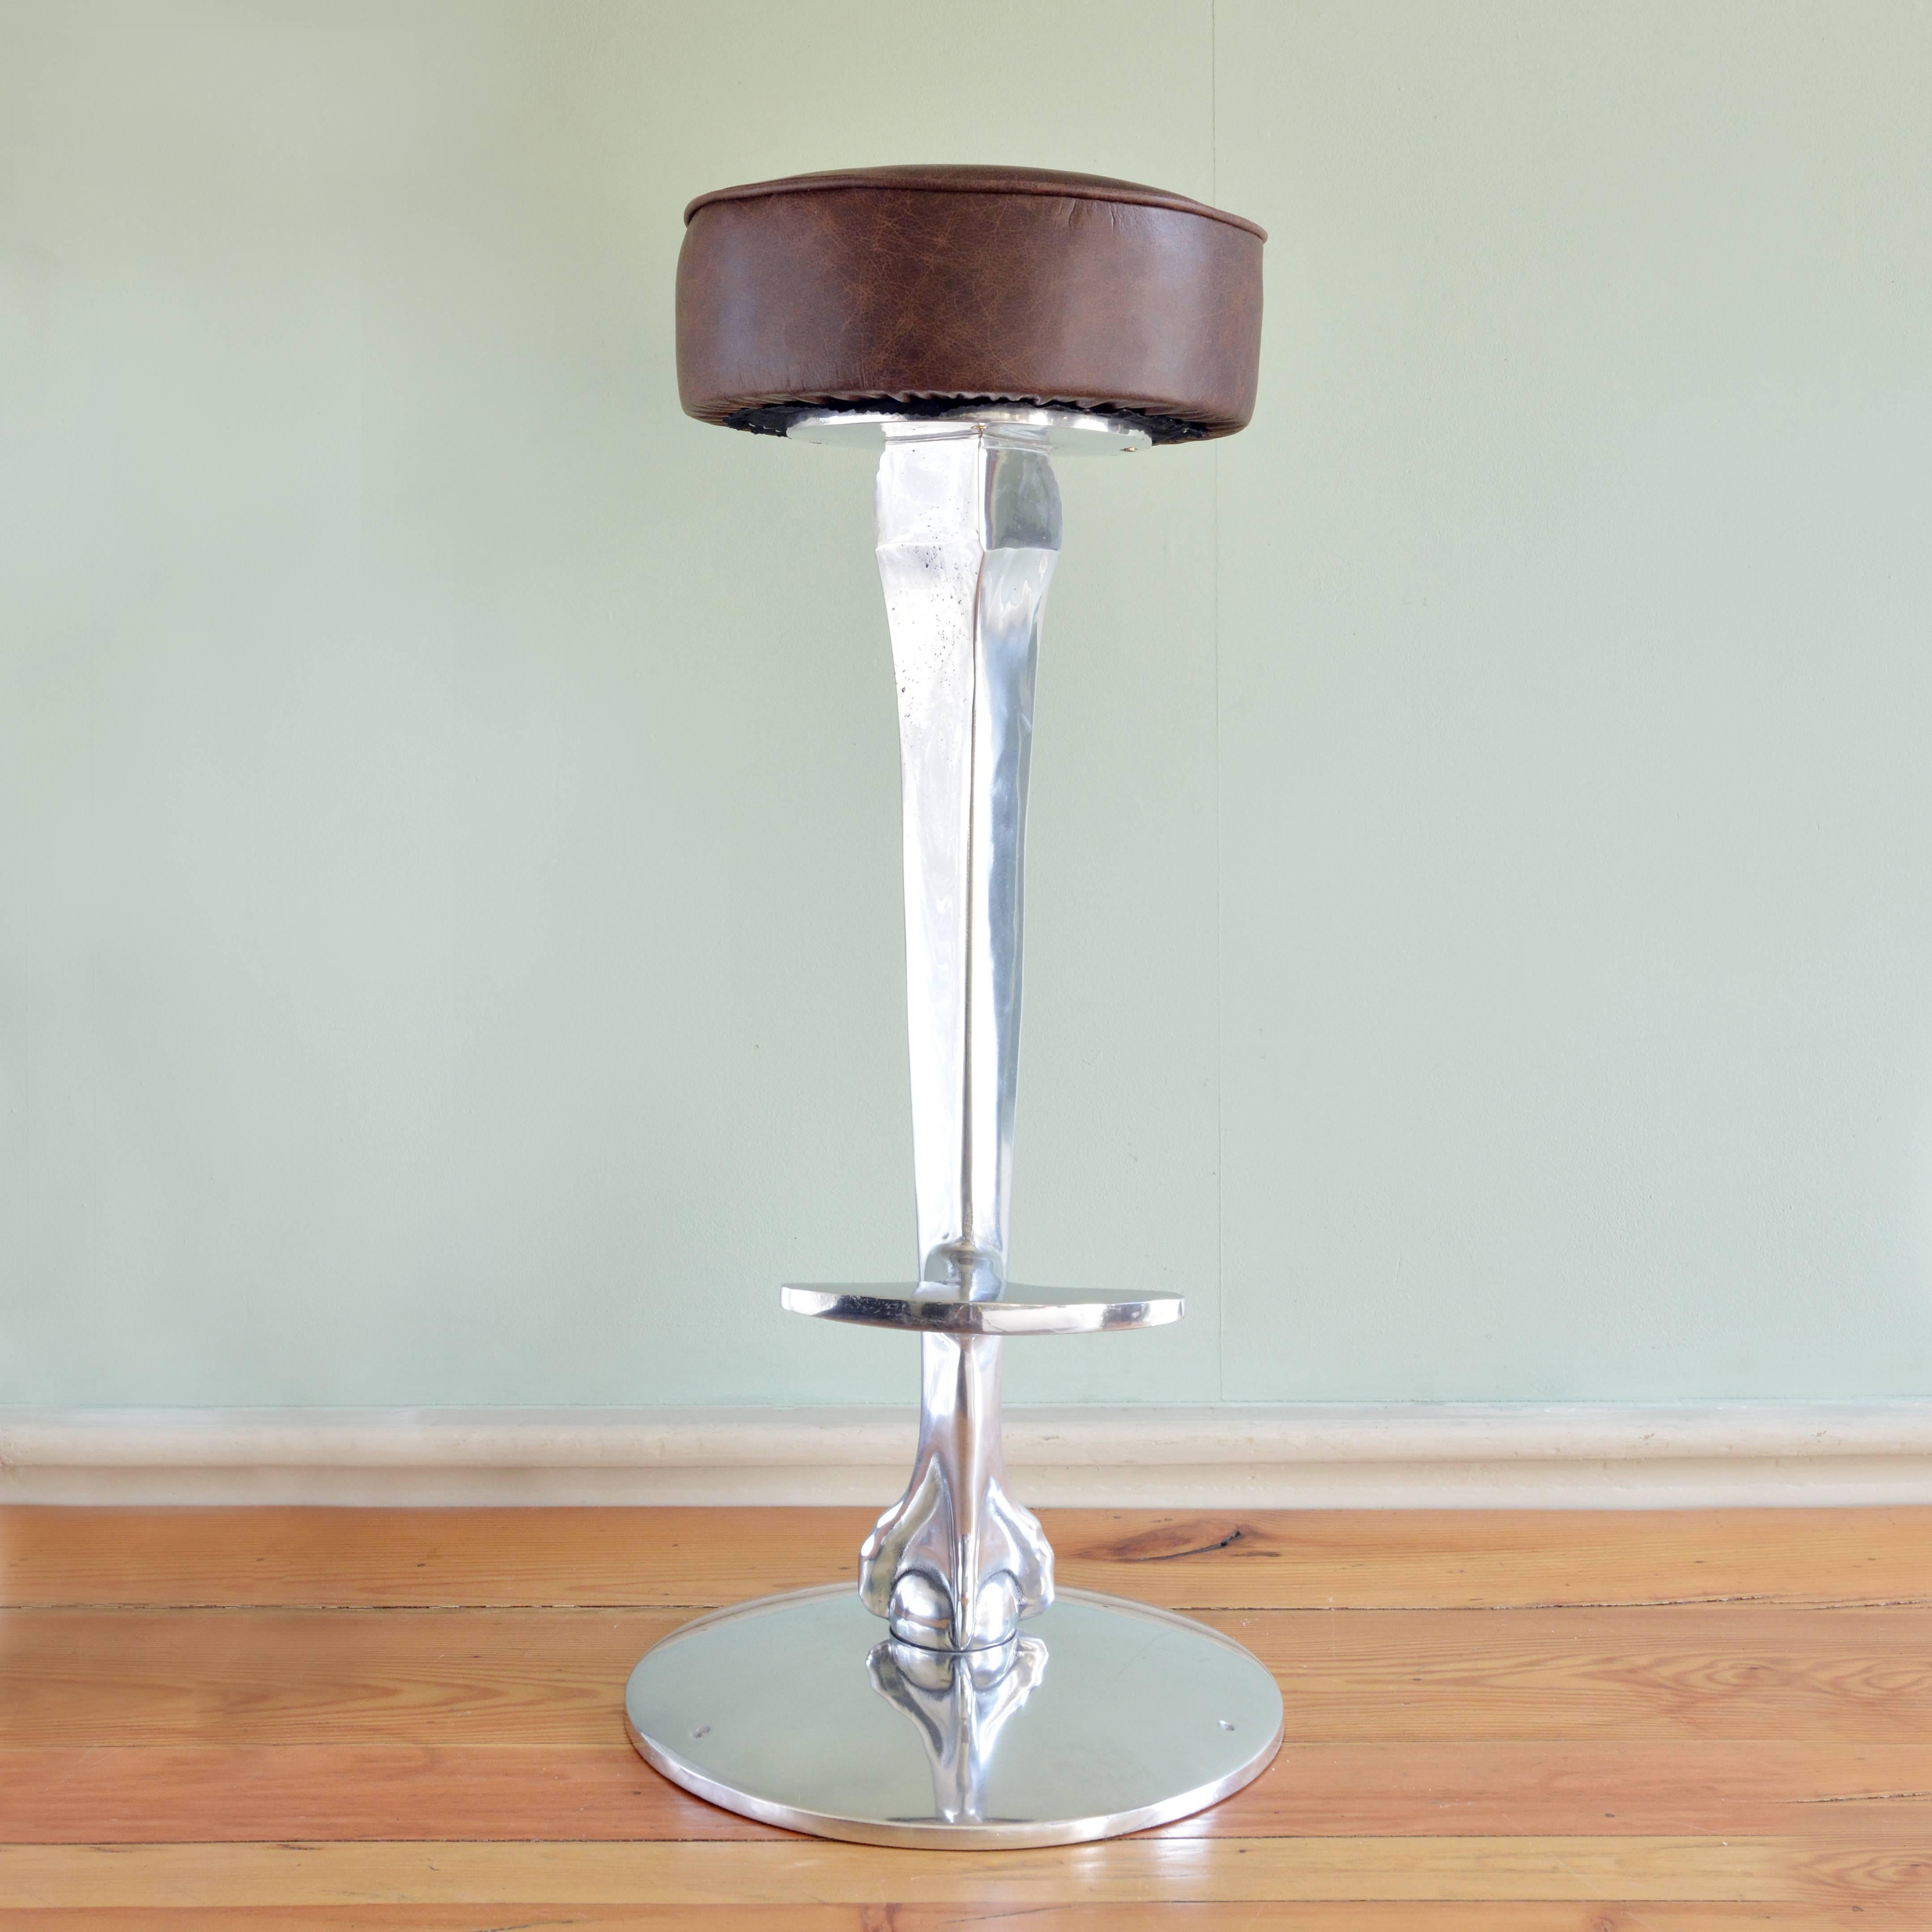 Cast and polished aluminium bar stool bases, of claw and ball design with foot-rest, with brown leather seat pad (three available but as these are reproduction more can be supplied). Available to purchased without the seat pad if required for £435